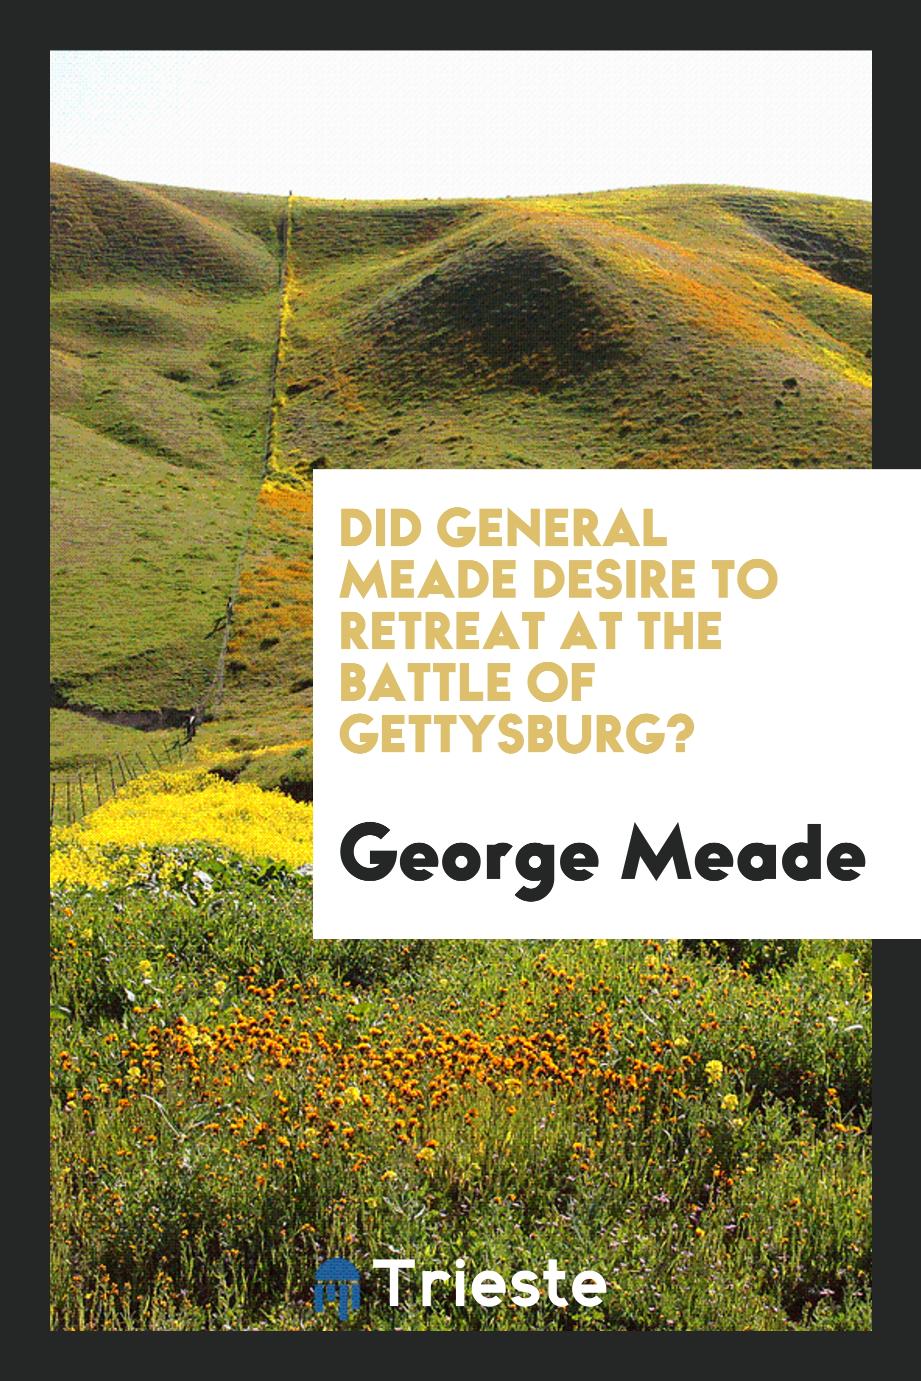 Did General Meade desire to retreat at the battle of Gettysburg?